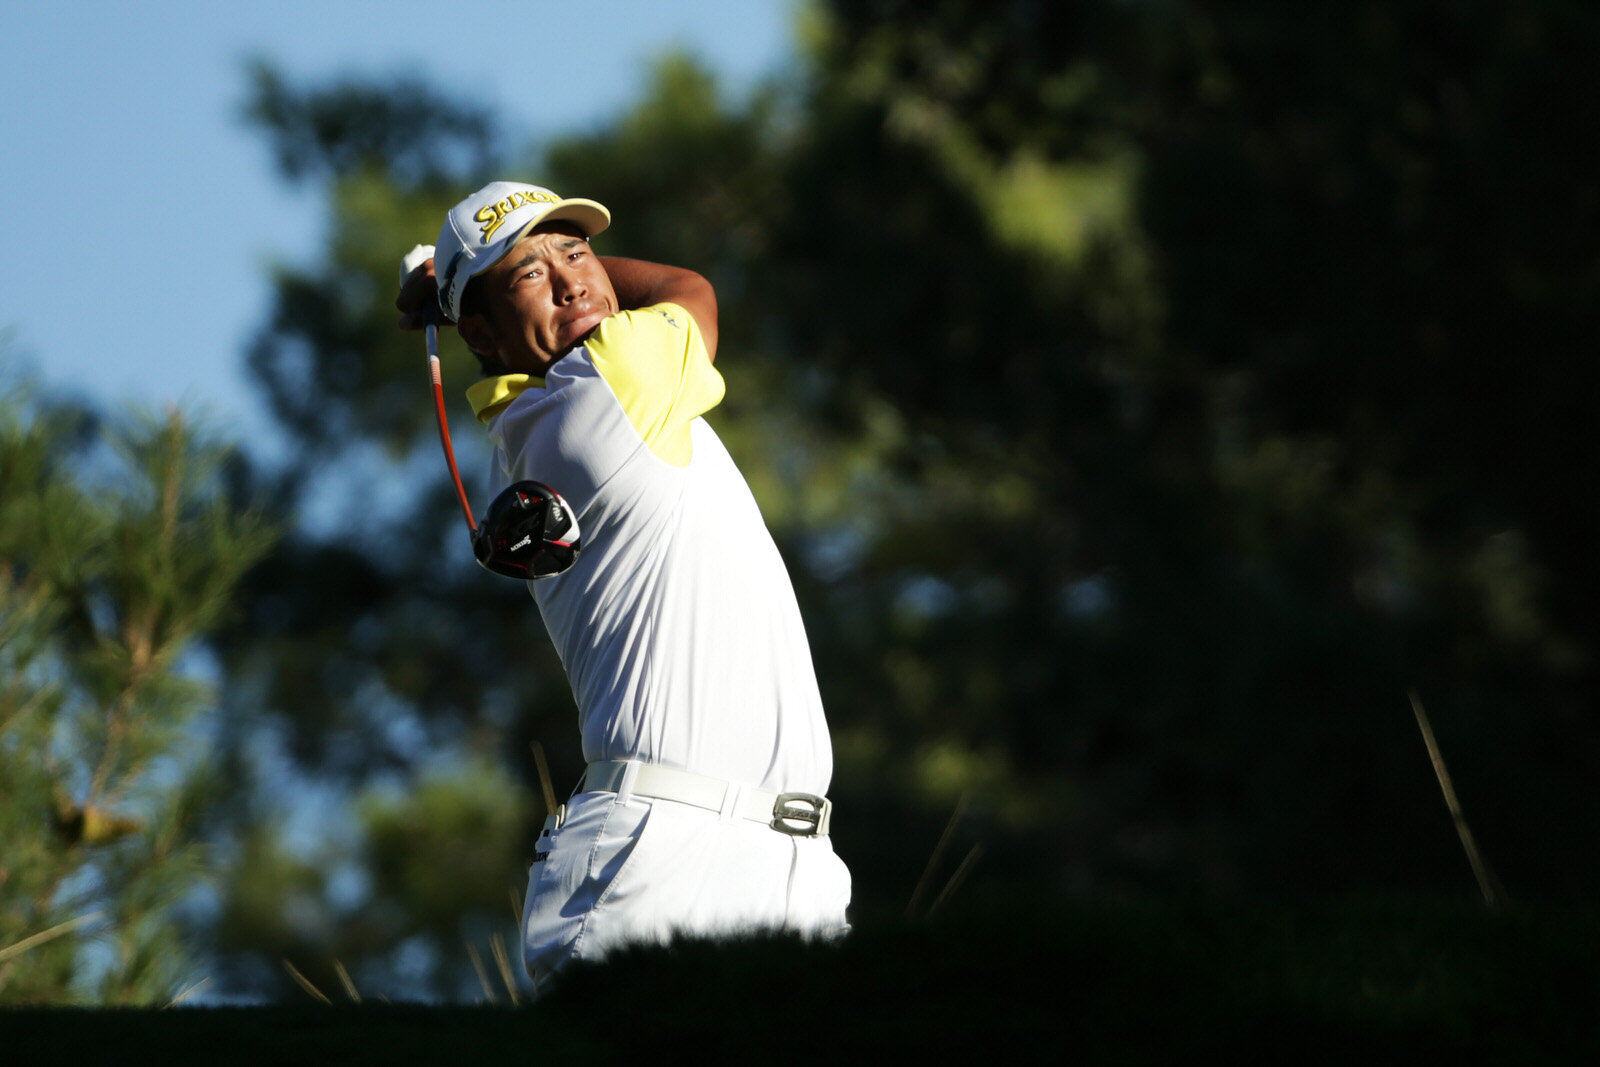  LAS VEGAS, NEVADA - OCTOBER 16:  Hideki Matsuyama of Japan plays his shot from the sixth tee during the second round of the CJ Cup @ Shadow Creek on October 16, 2020 in Las Vegas, Nevada. (Photo by Jeff Gross/Getty Images) 